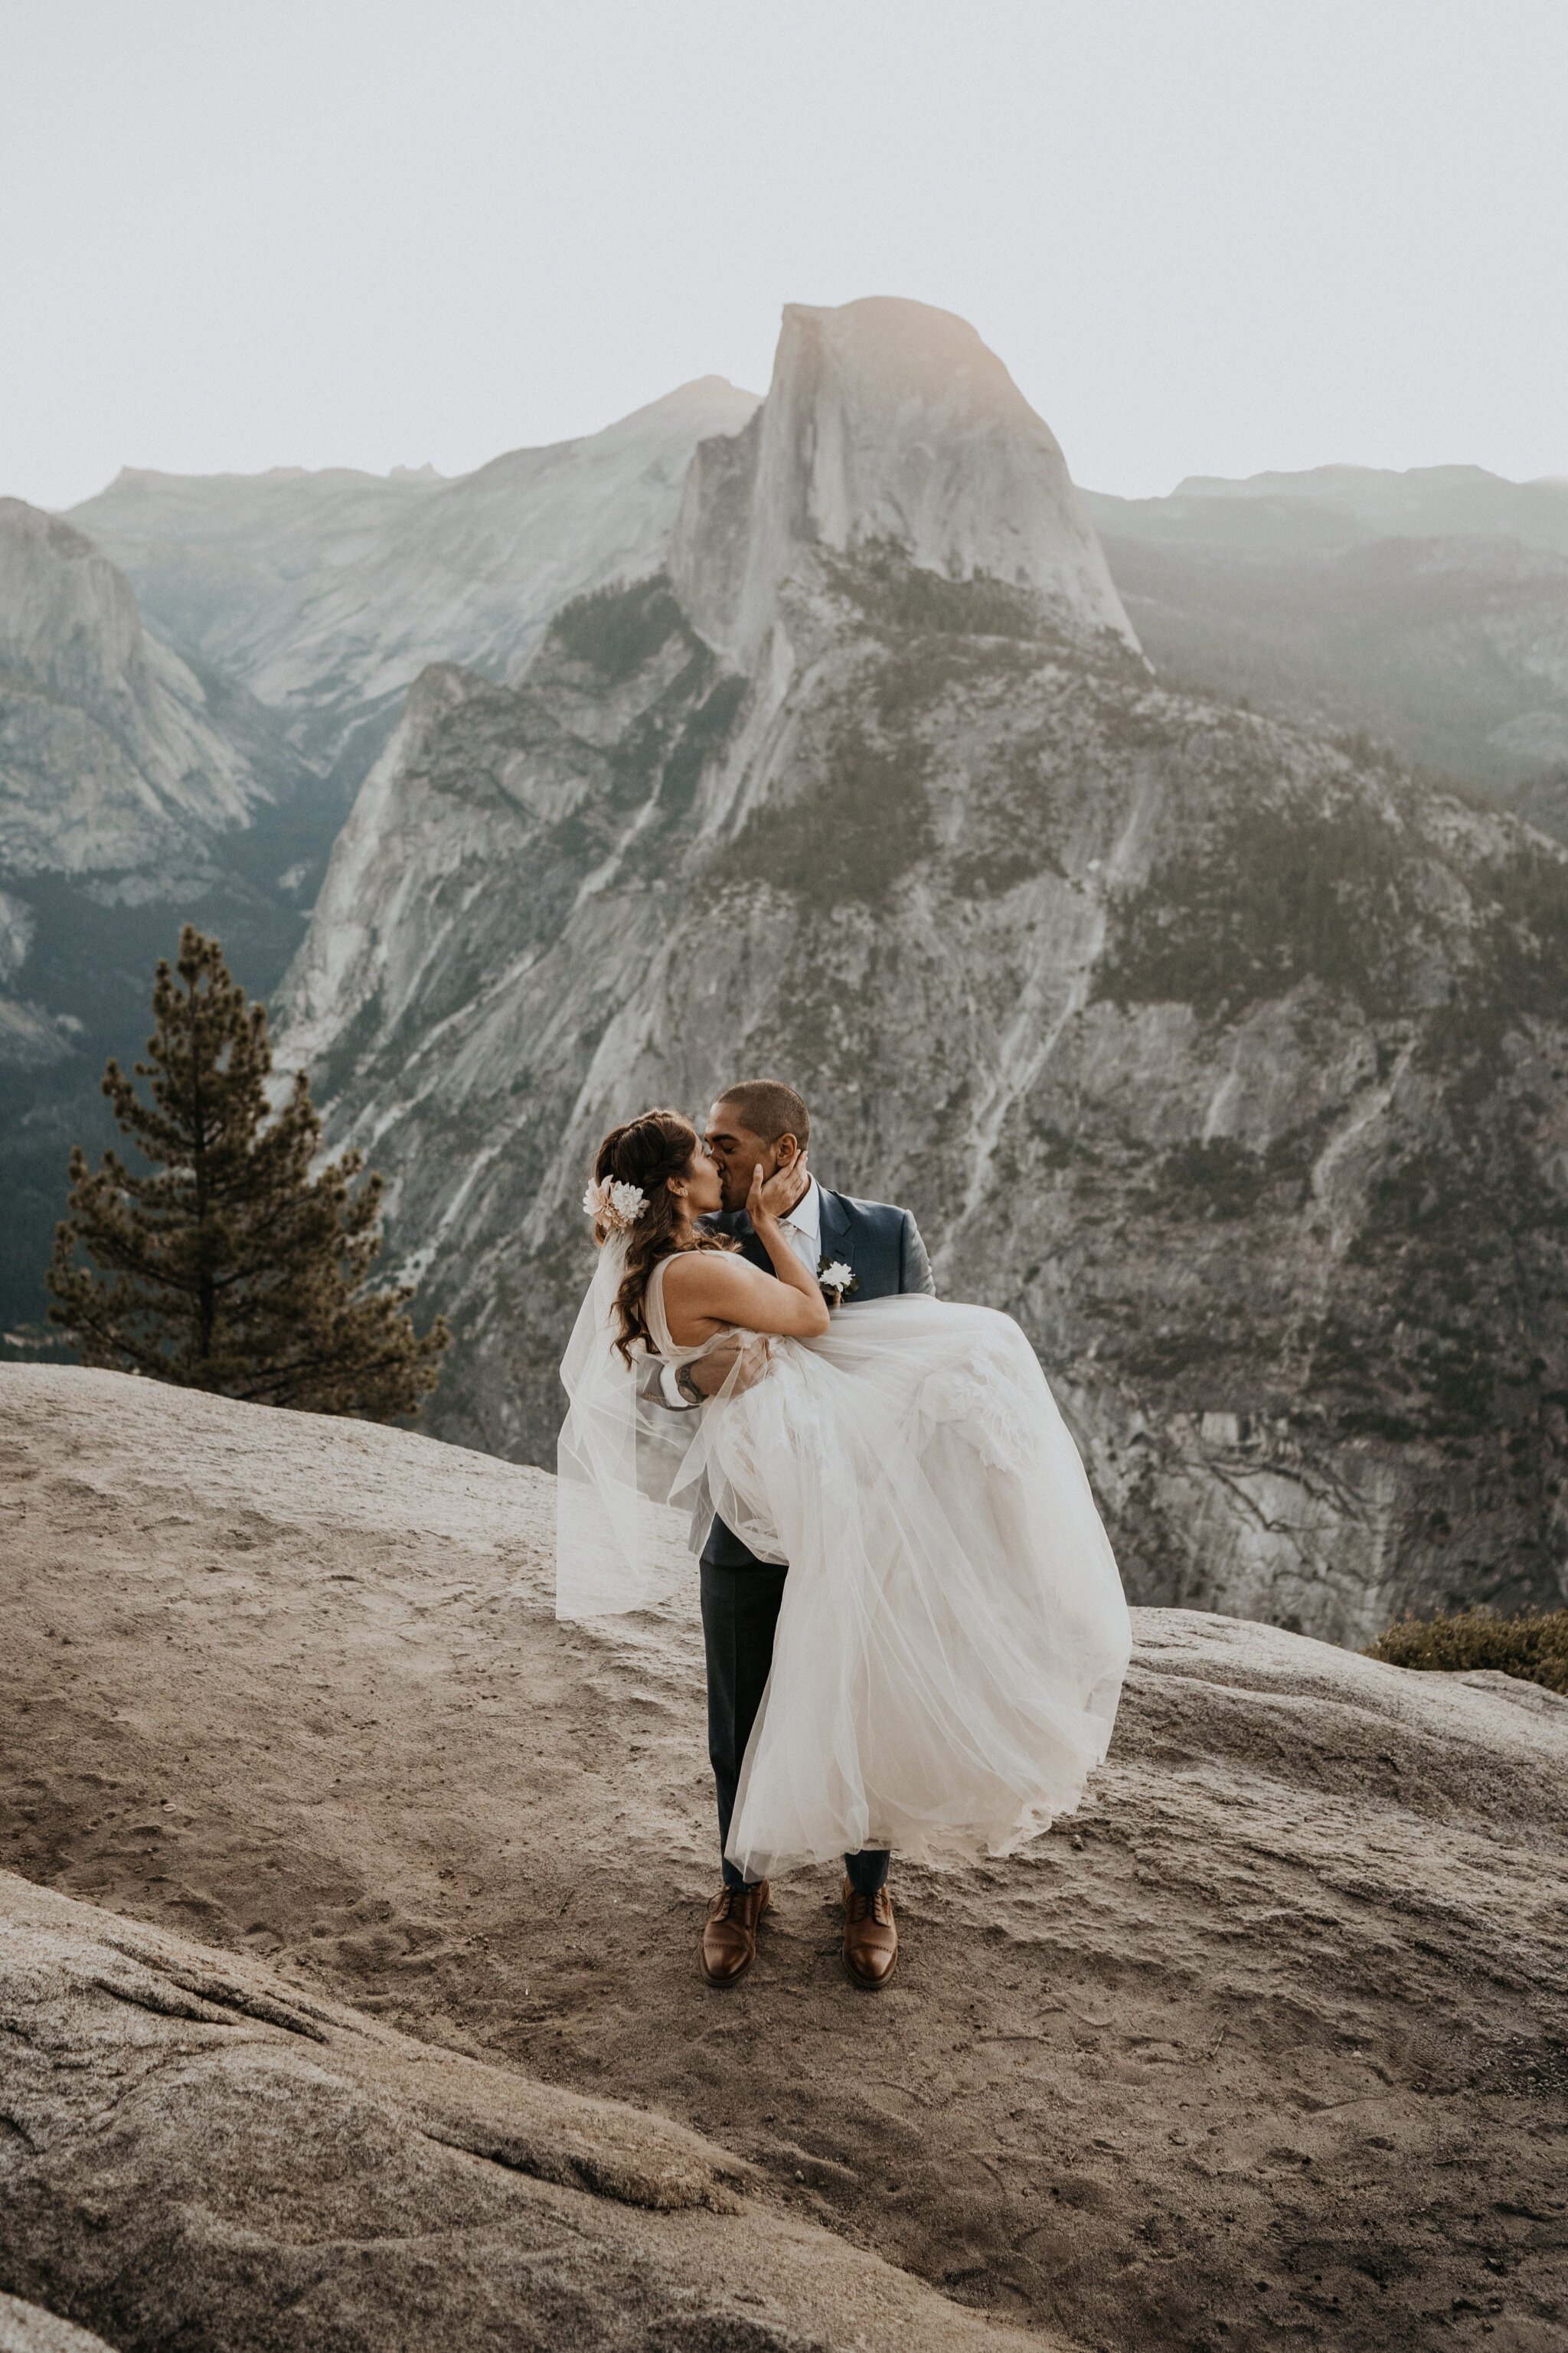 Yosemite National Park elopement and wedding photos at Glacier Point during sunrise with view of Half Dome